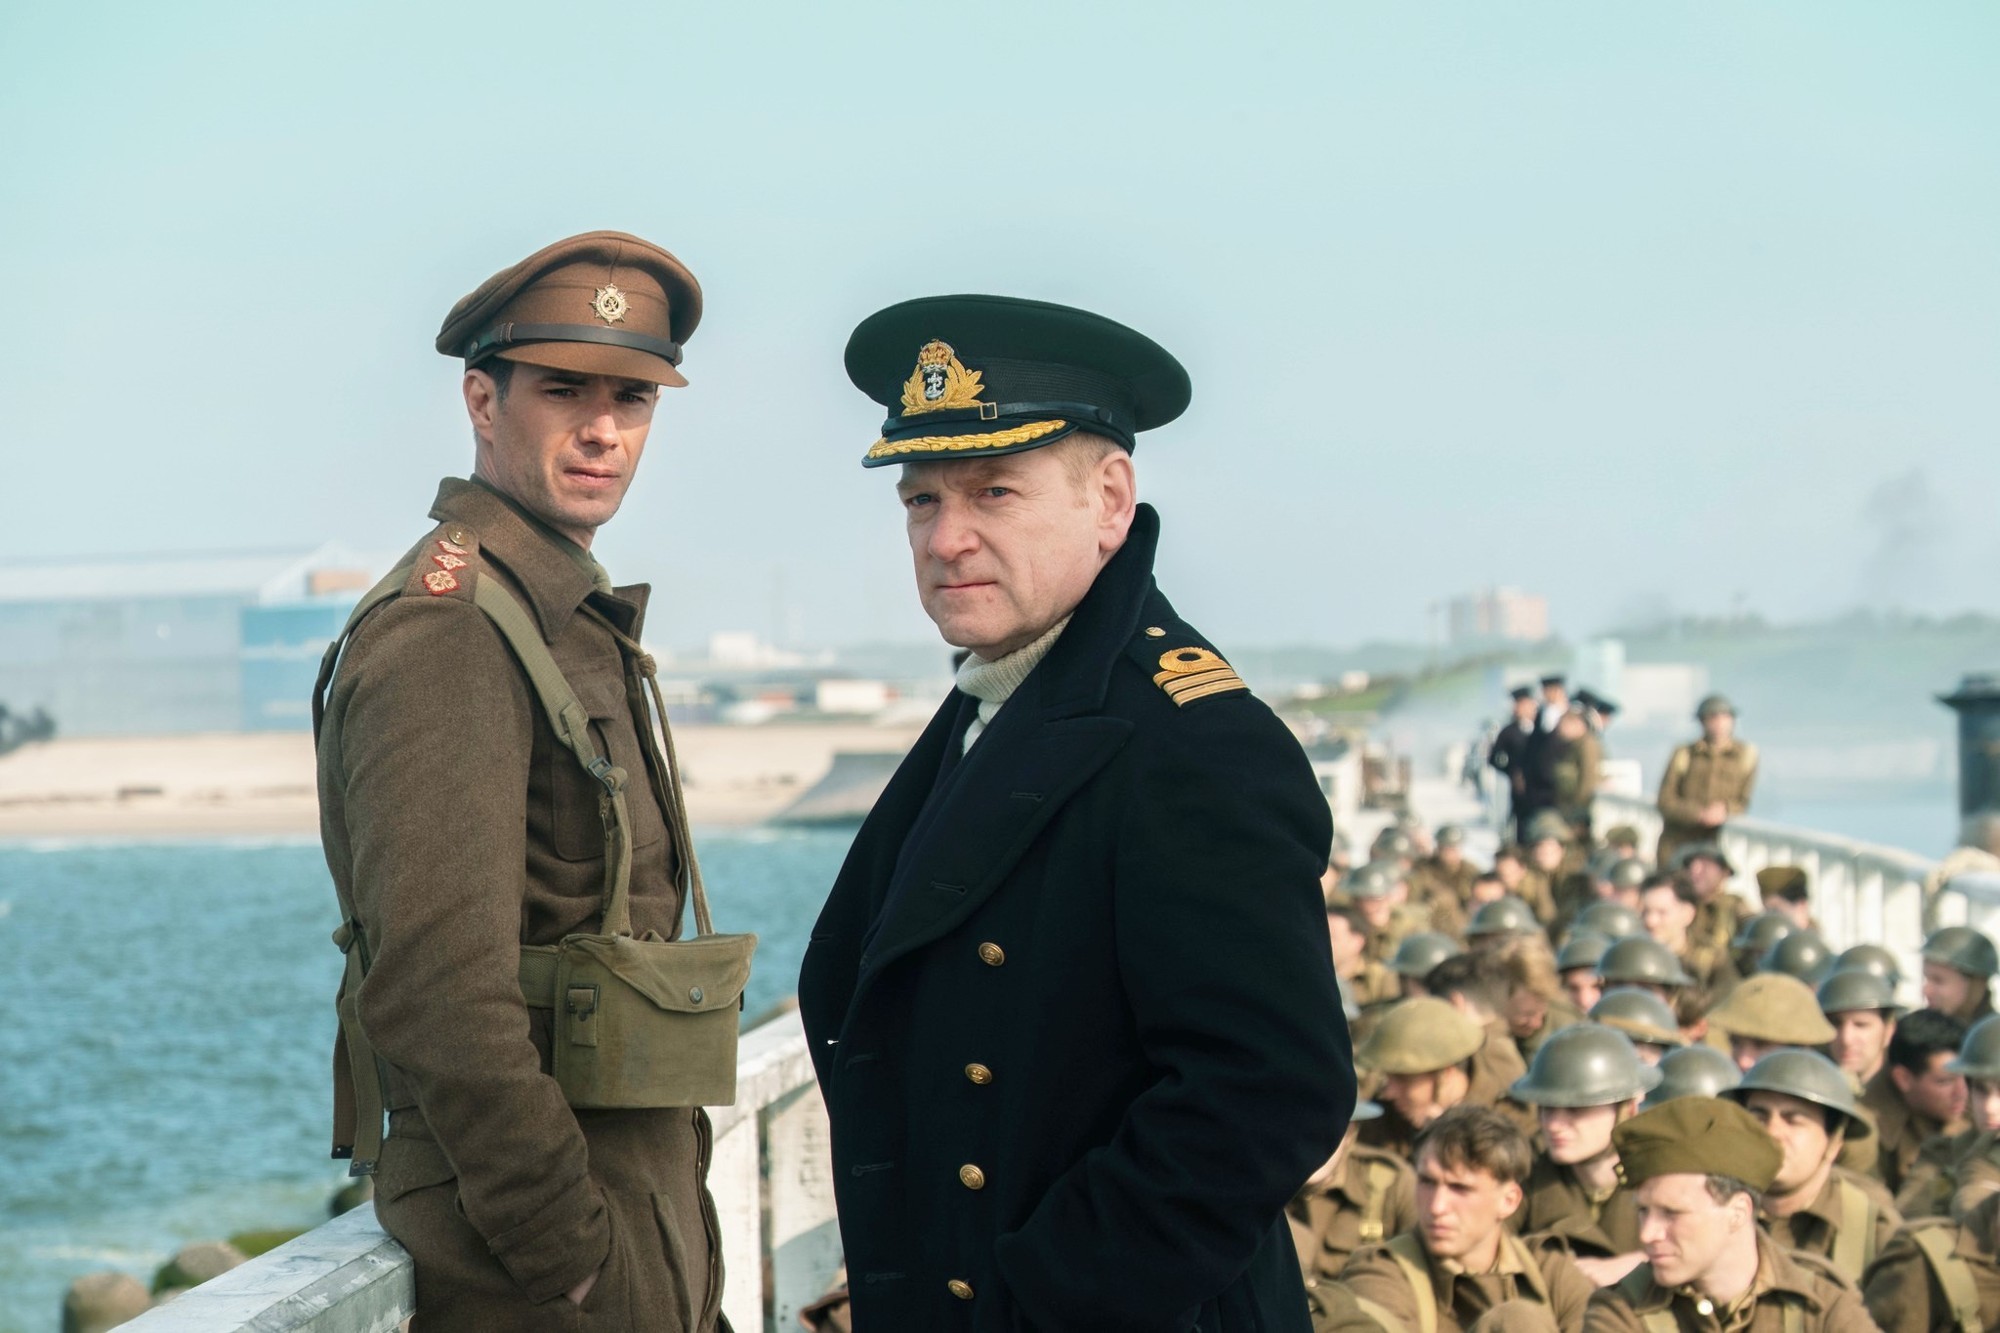 James D'Arcy stars as Captain Winnant and Kenneth Branagh stars as Commander Bolton in Warner Bros. Pictures' Dunkirk (2017)